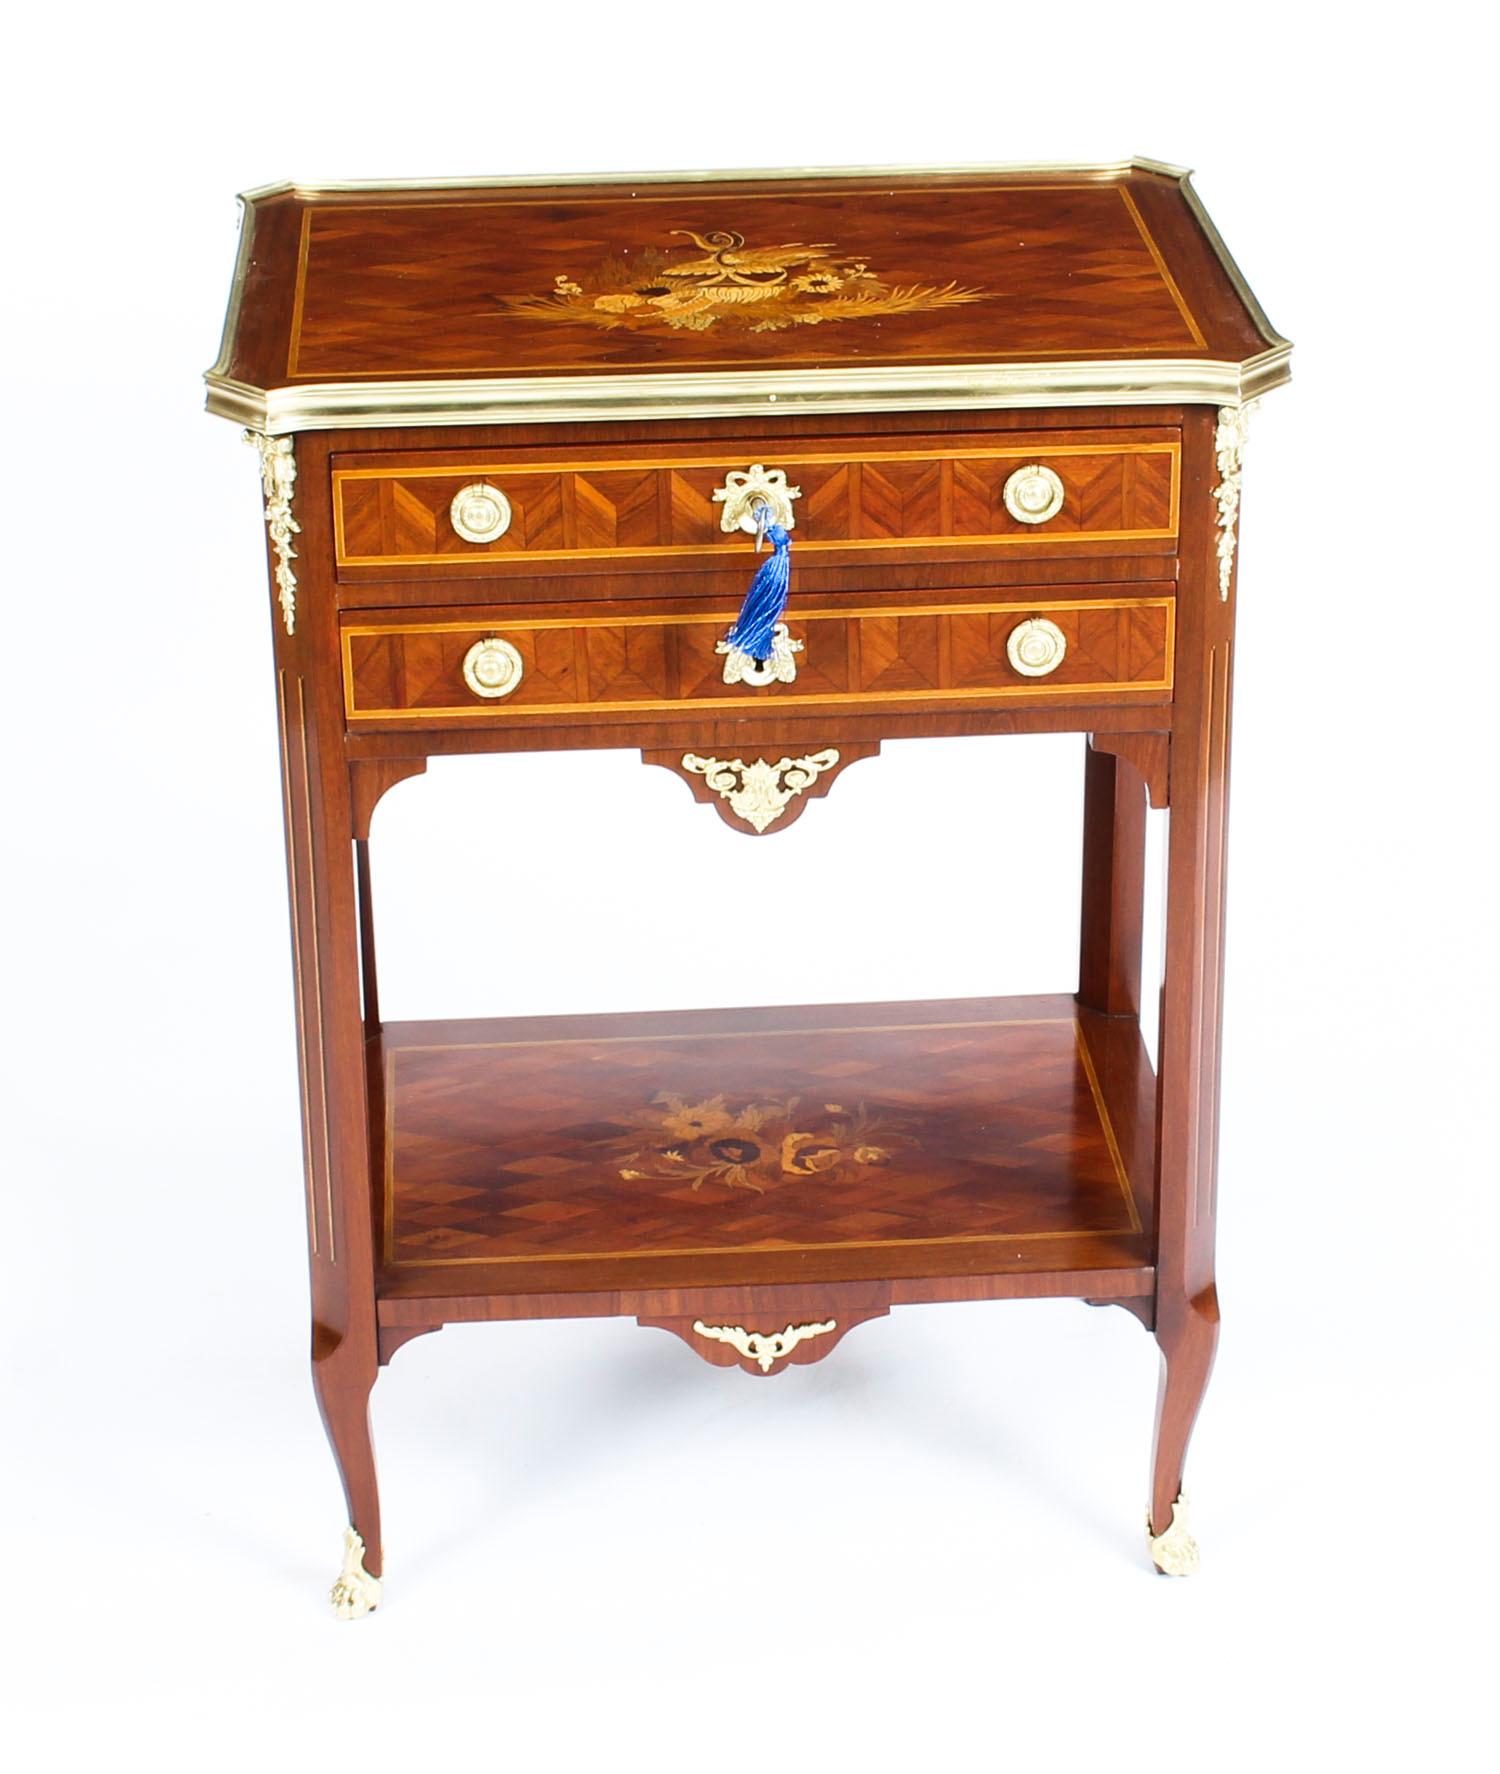 This is a wonderful antique French parquetry and marquetry ormolu-mounted occasional work table or table en chiffonière in the Transitional style, circa 1870 in date.

The ormolu banded top with beautiful floral marquetry and outset canted corners,